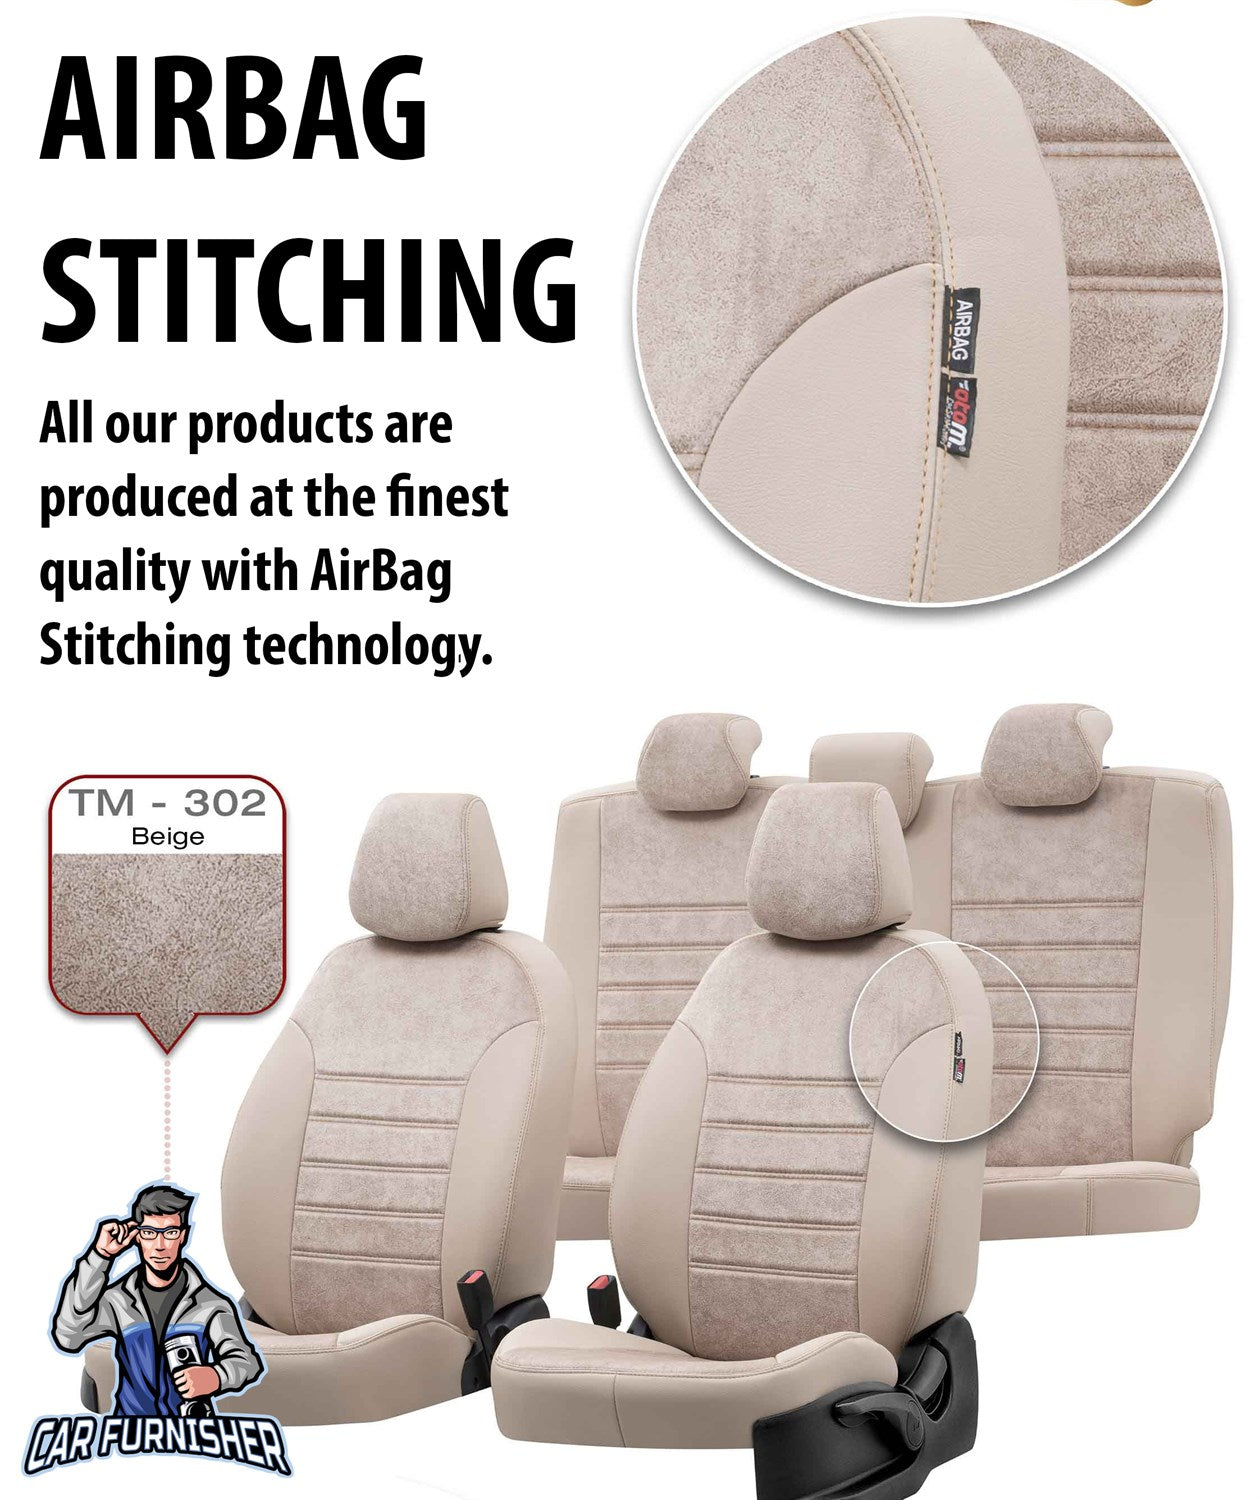 Fiat Bravo Seat Covers Milano Suede Design Smoked Leather & Suede Fabric